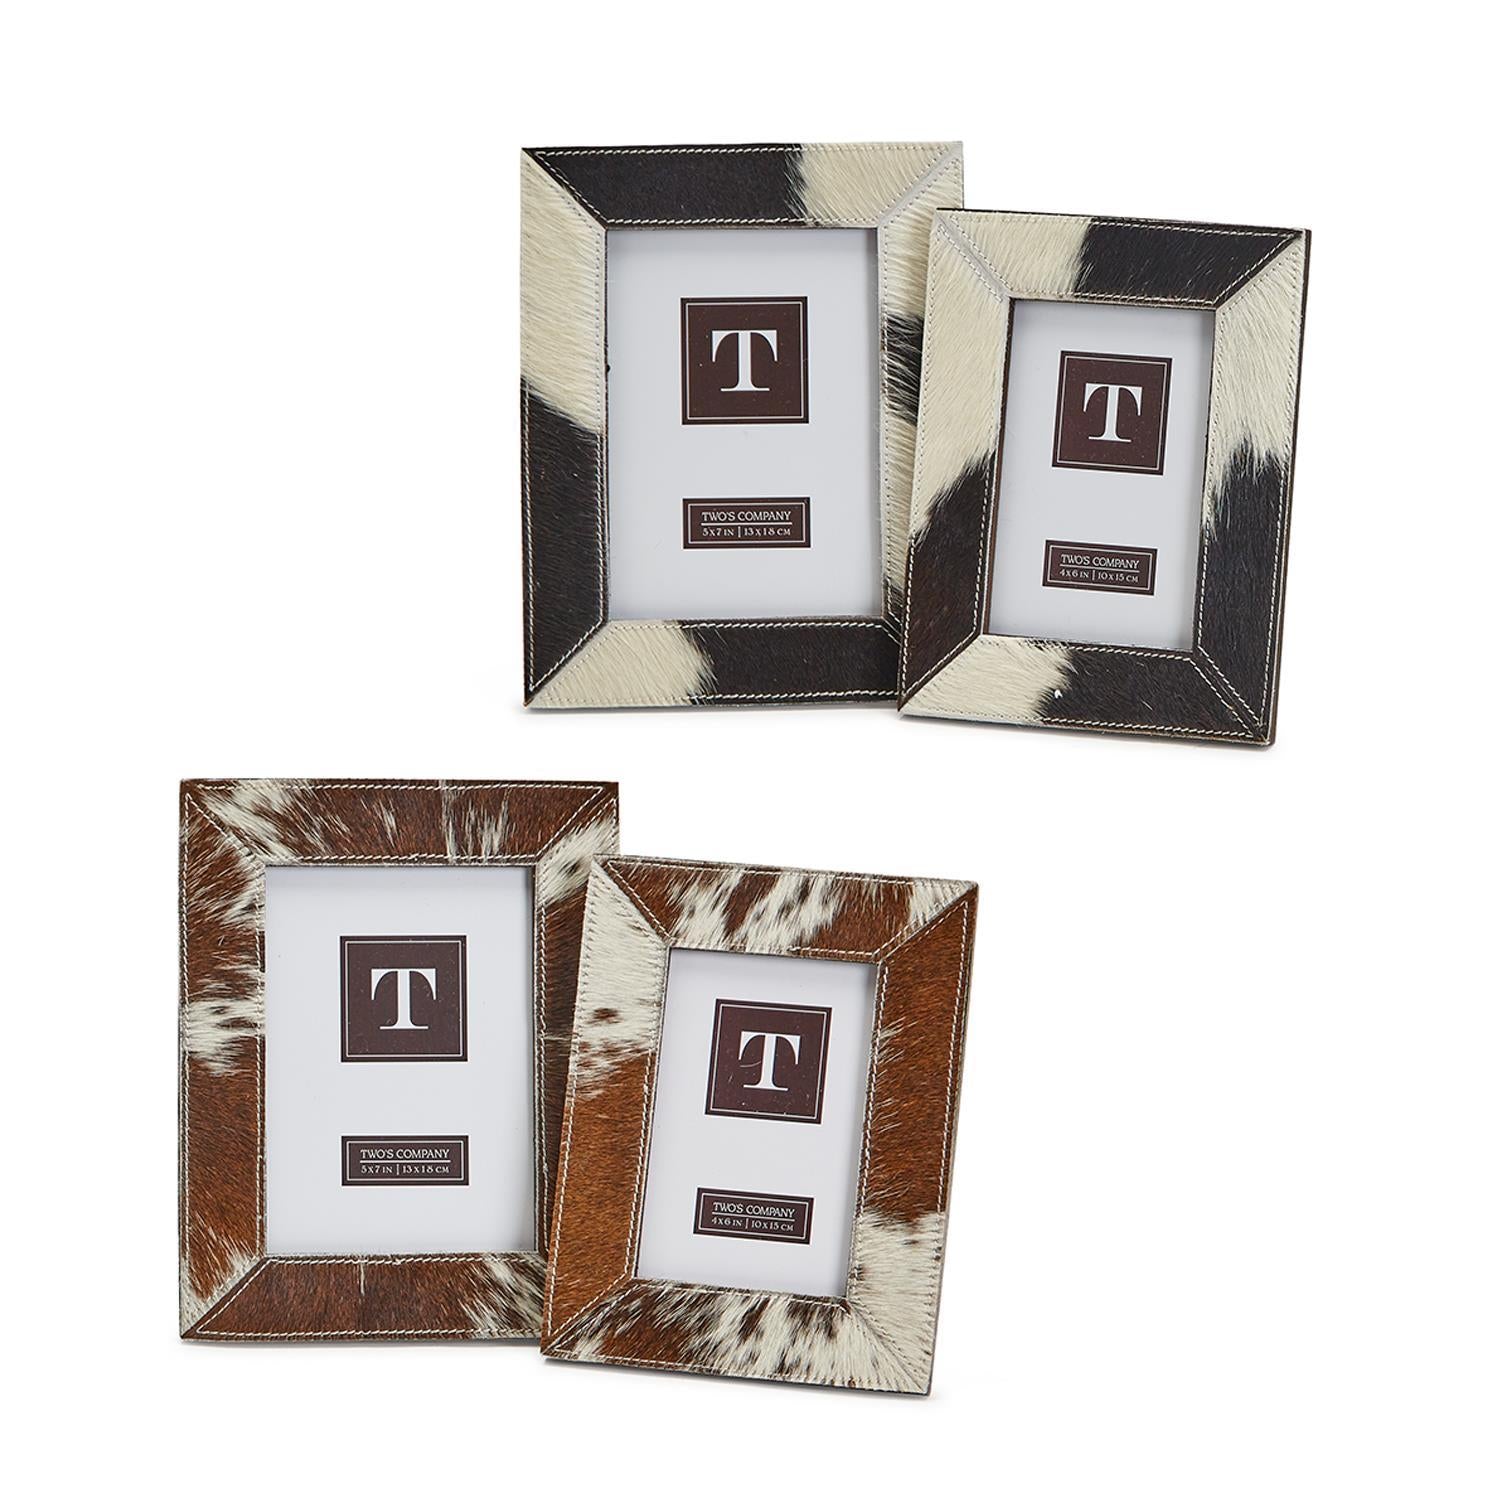 Two's Company In the Mirror Photo Frames,Set of 2, 4x6 inches and 5x7 inches